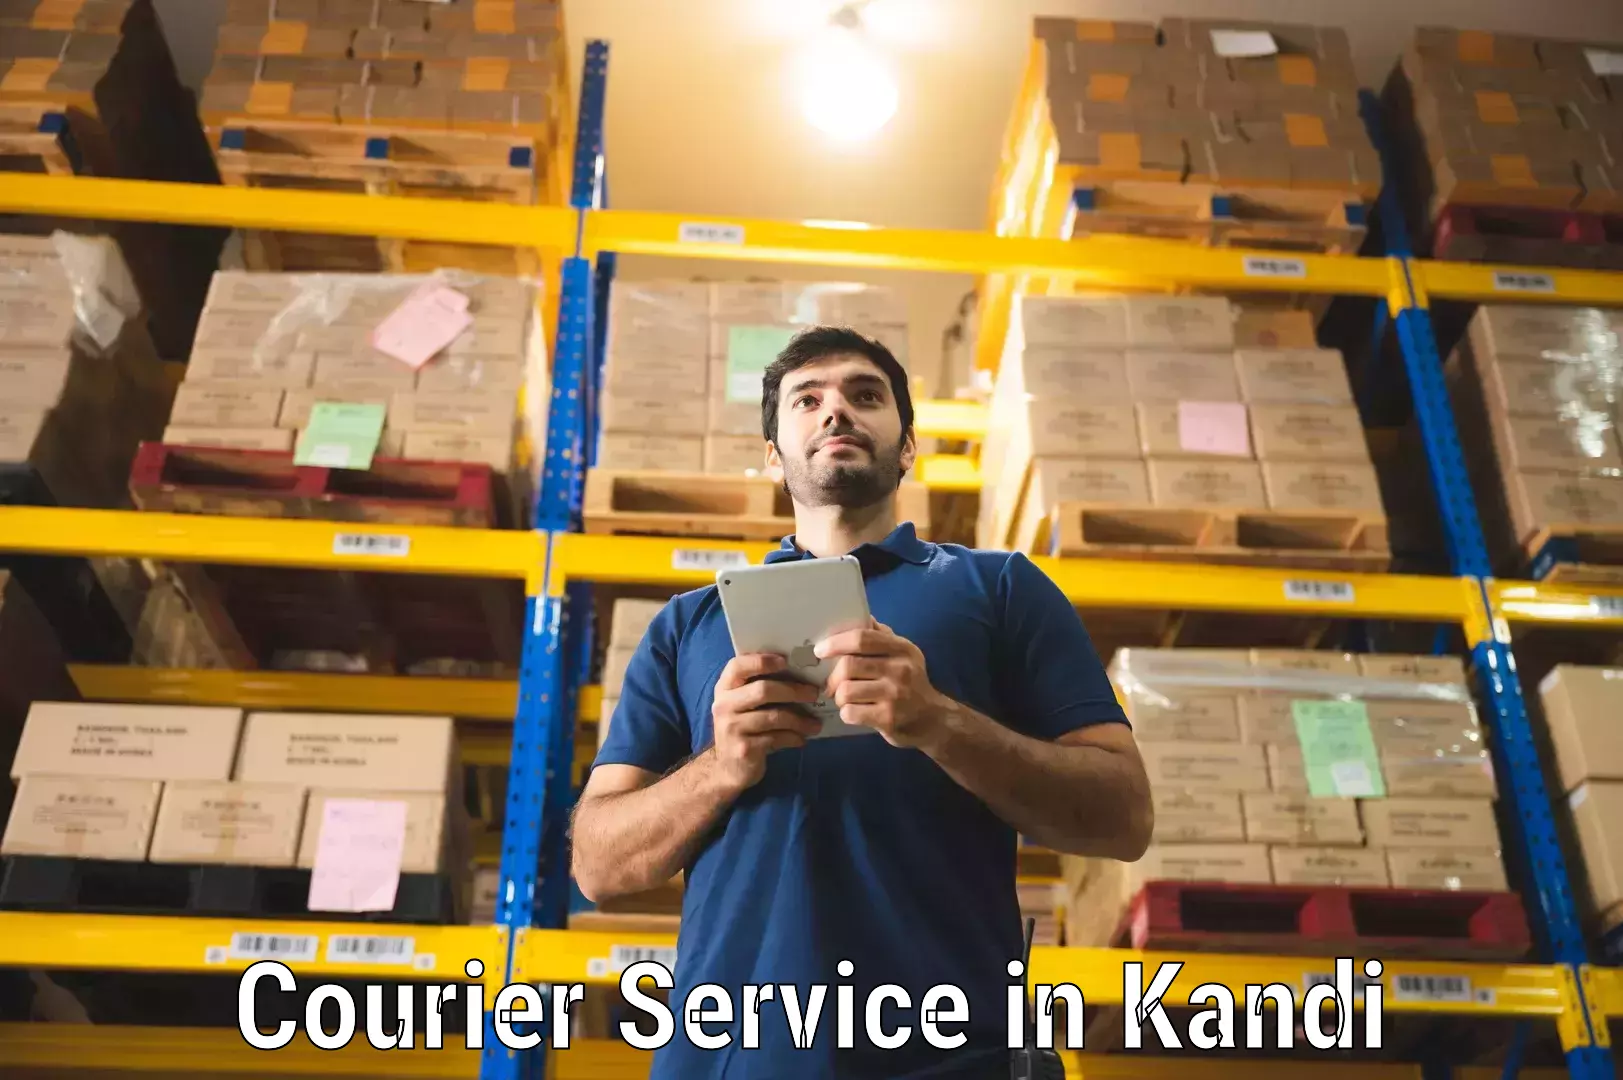 Fastest parcel delivery in Kandi